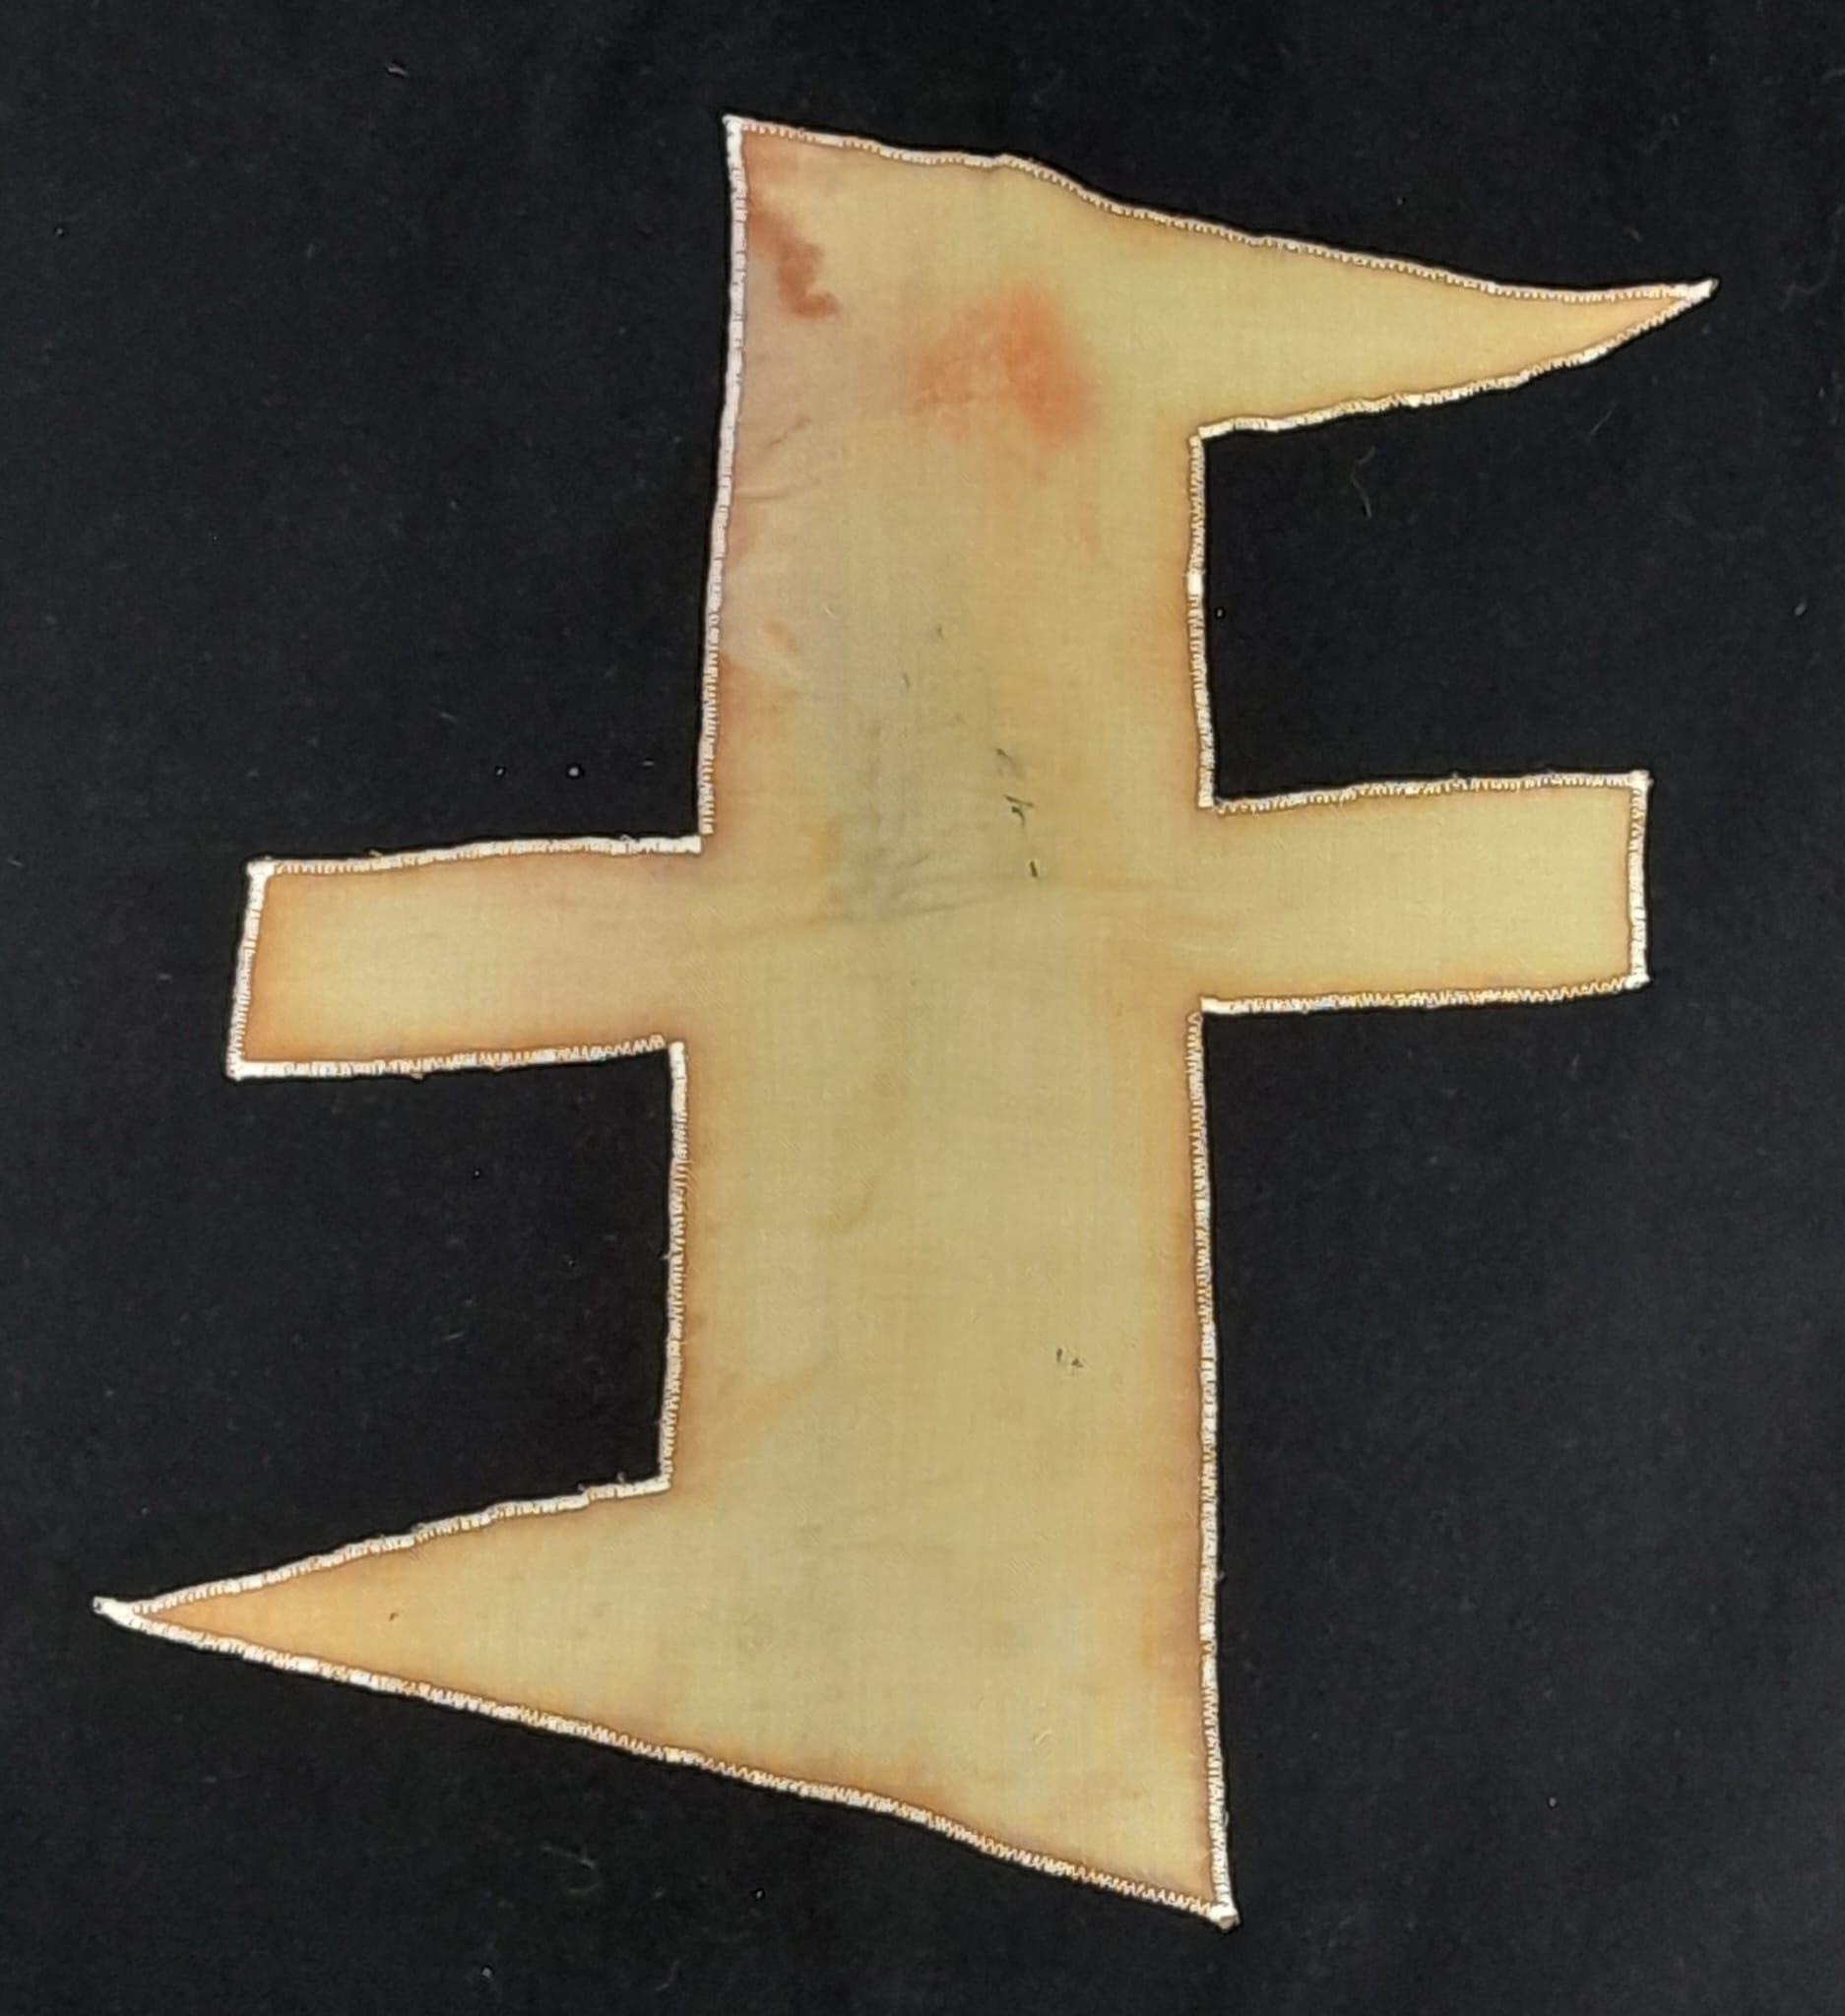 3 rd Reich Netherland Waffen SS Trumpet Banner. Dutch attic find. A little moth nipping here and - Image 4 of 4